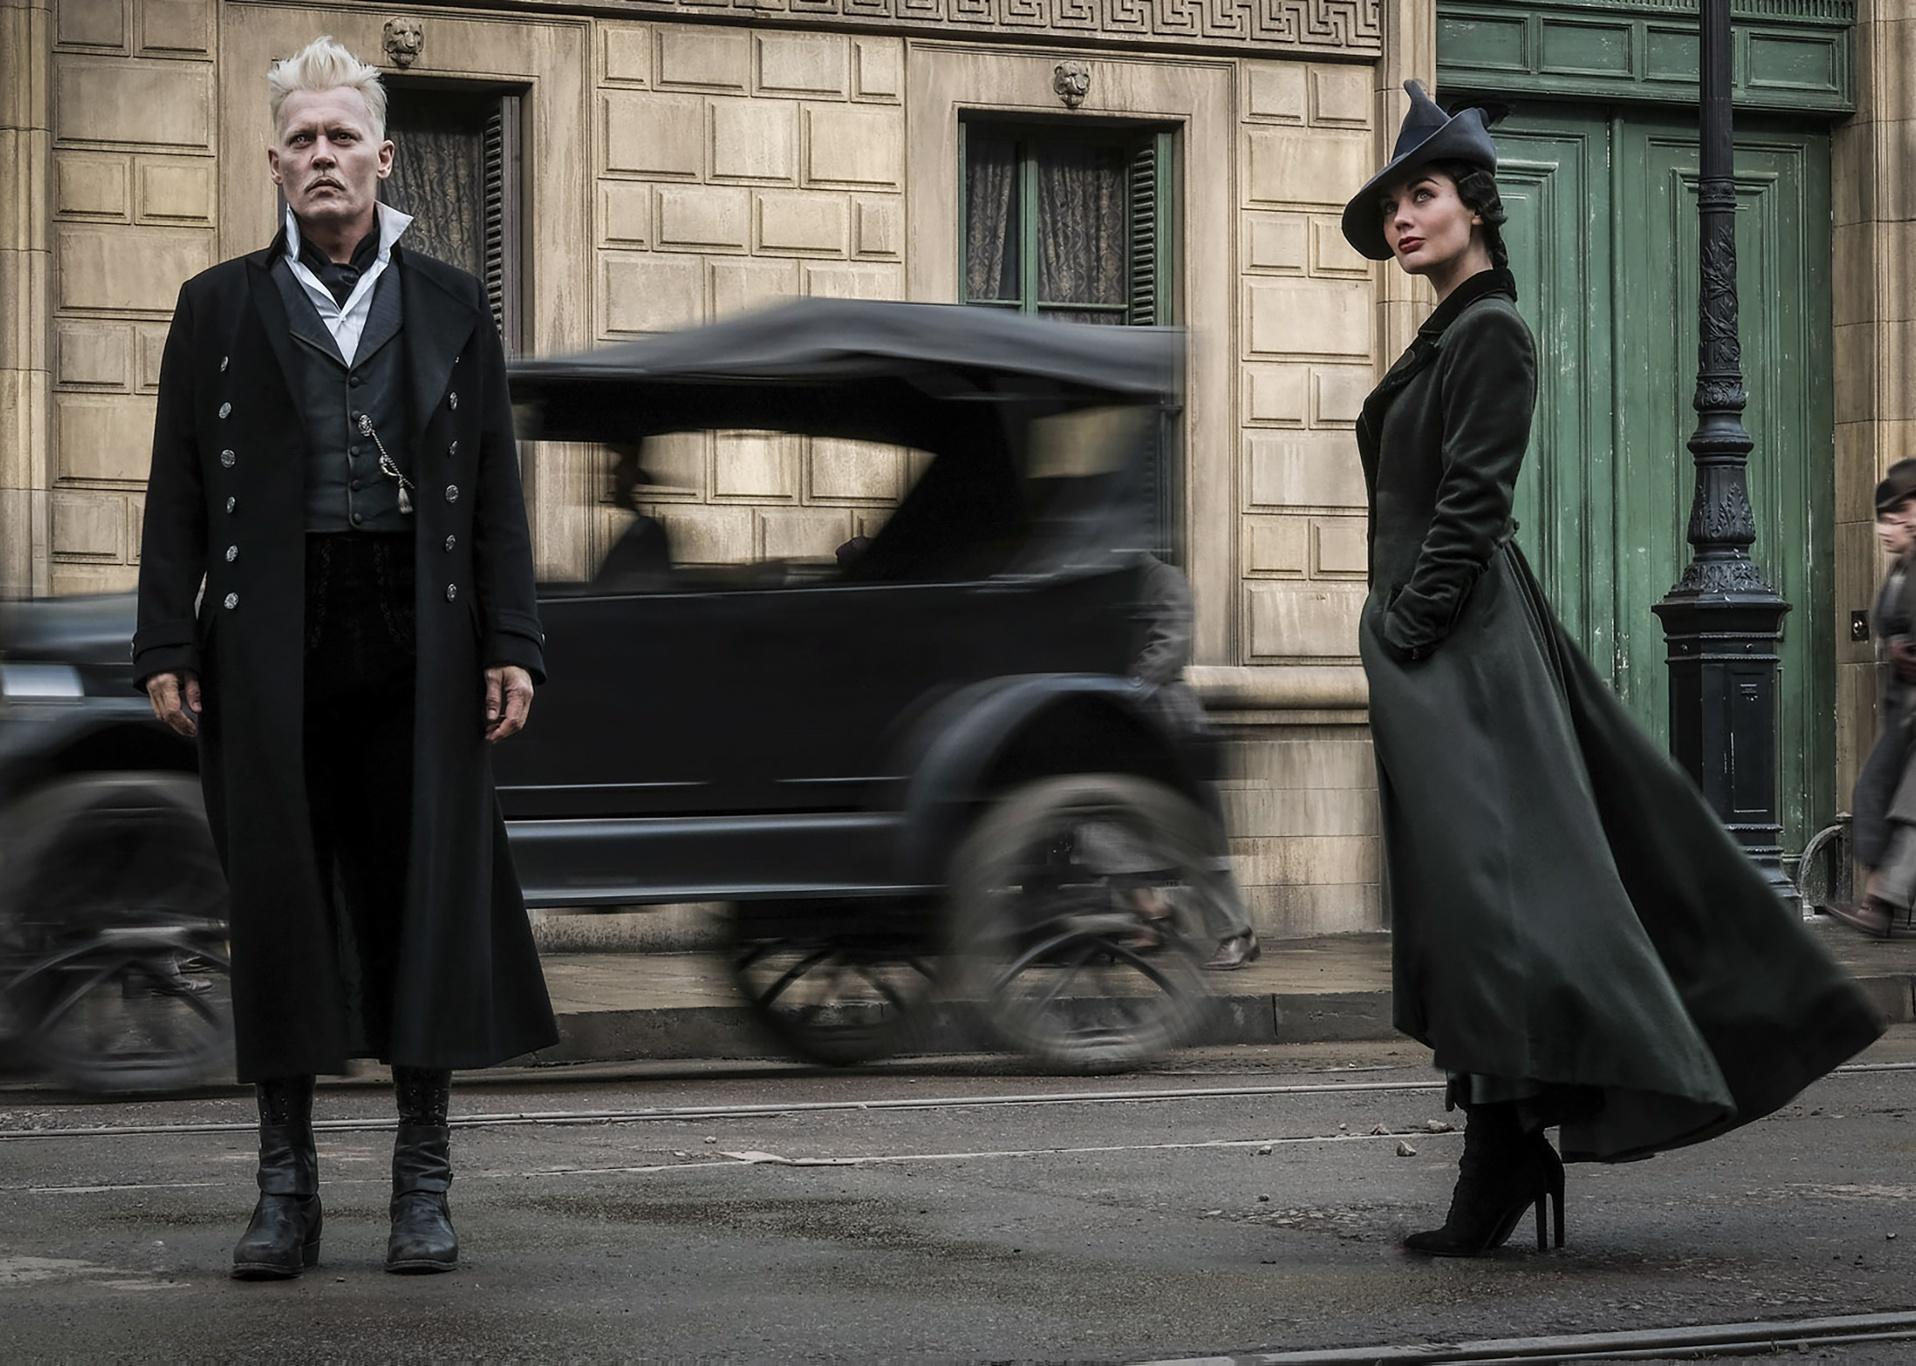 Johnny Depp with white hair and Poppy Corby-Tuech in all black standing on a street with an old car whizzing by behind them.